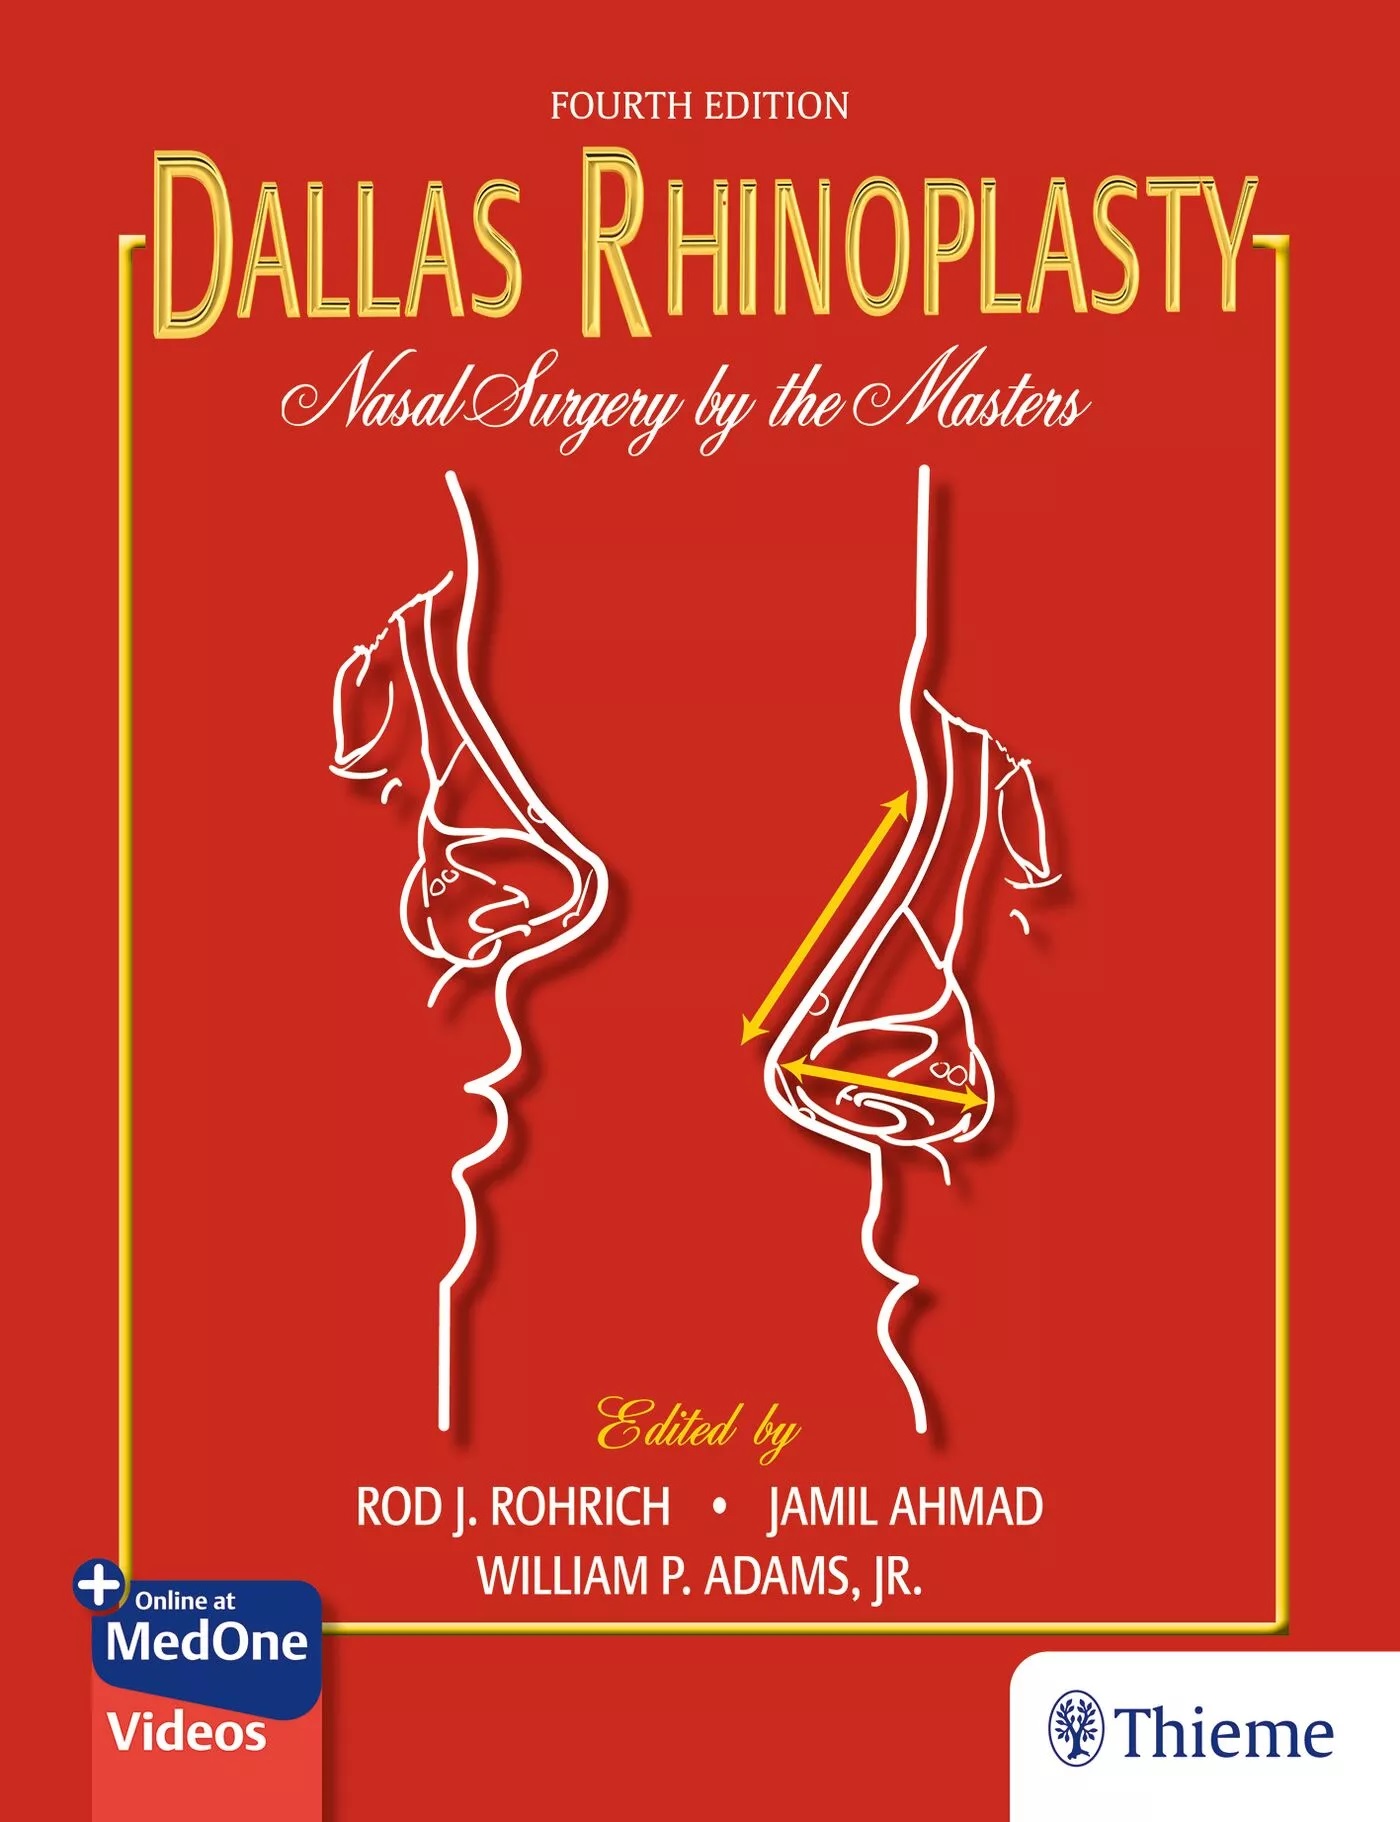 Dallas Rhinoplasty, 4th ed.- Nasal Surgery by the Masters